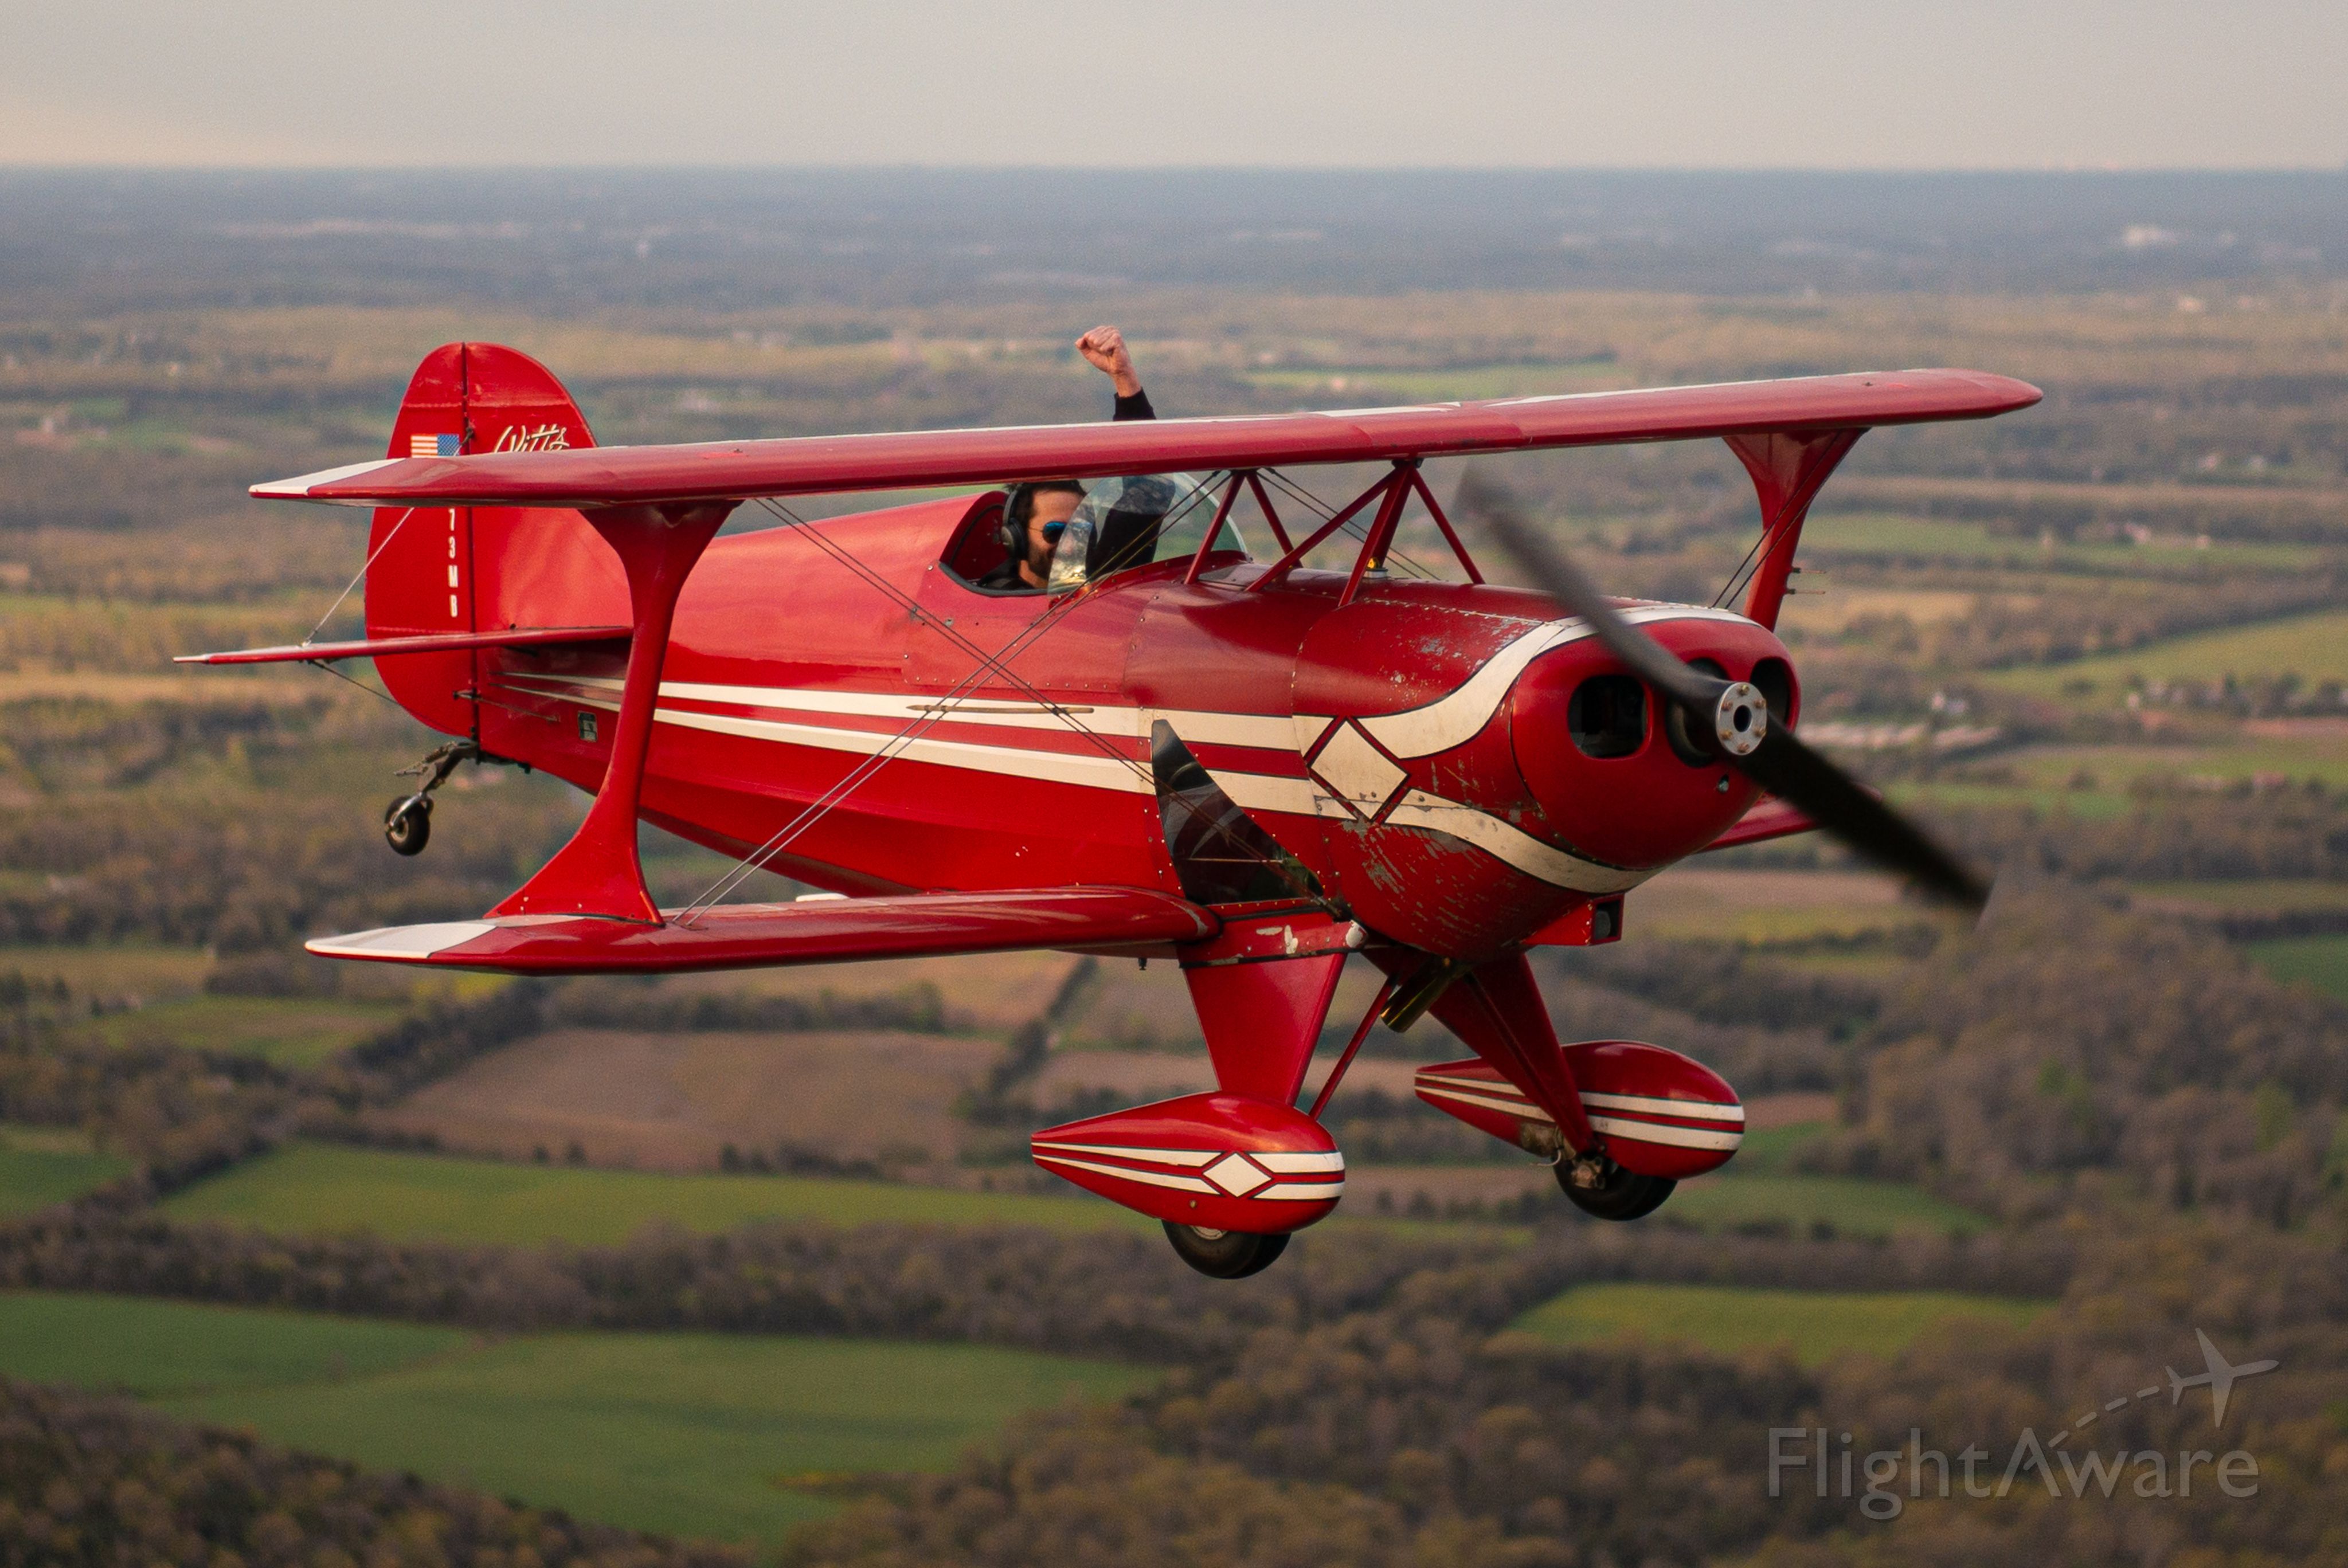 PITTS Special (S-1) (N73MB) - RJ Gritter pilots the Pitts S-1A over Midland, VA